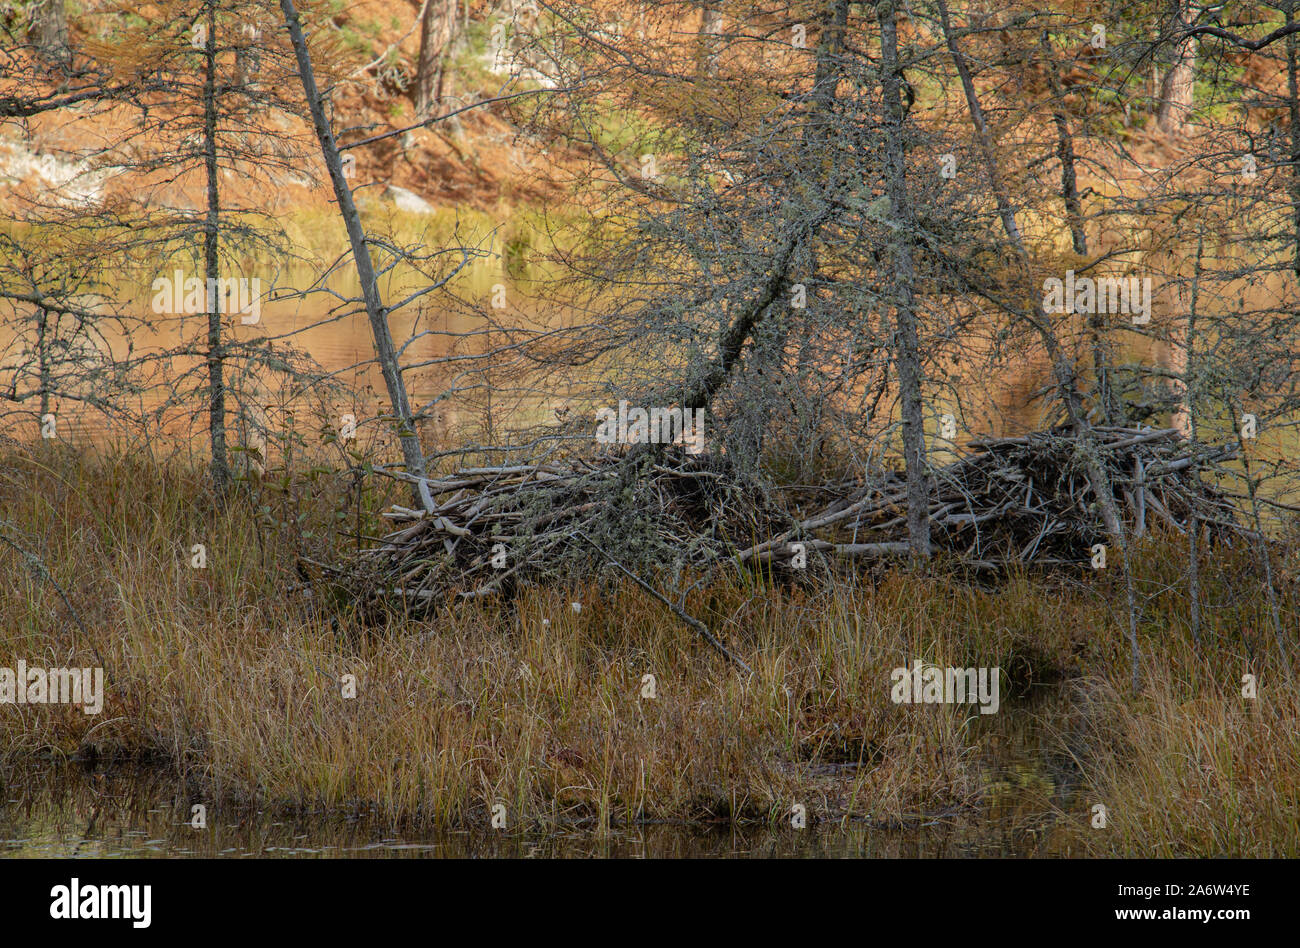 Two large beaver dams in a creek surrounded by colourful vegetation in autumn. Stock Photo